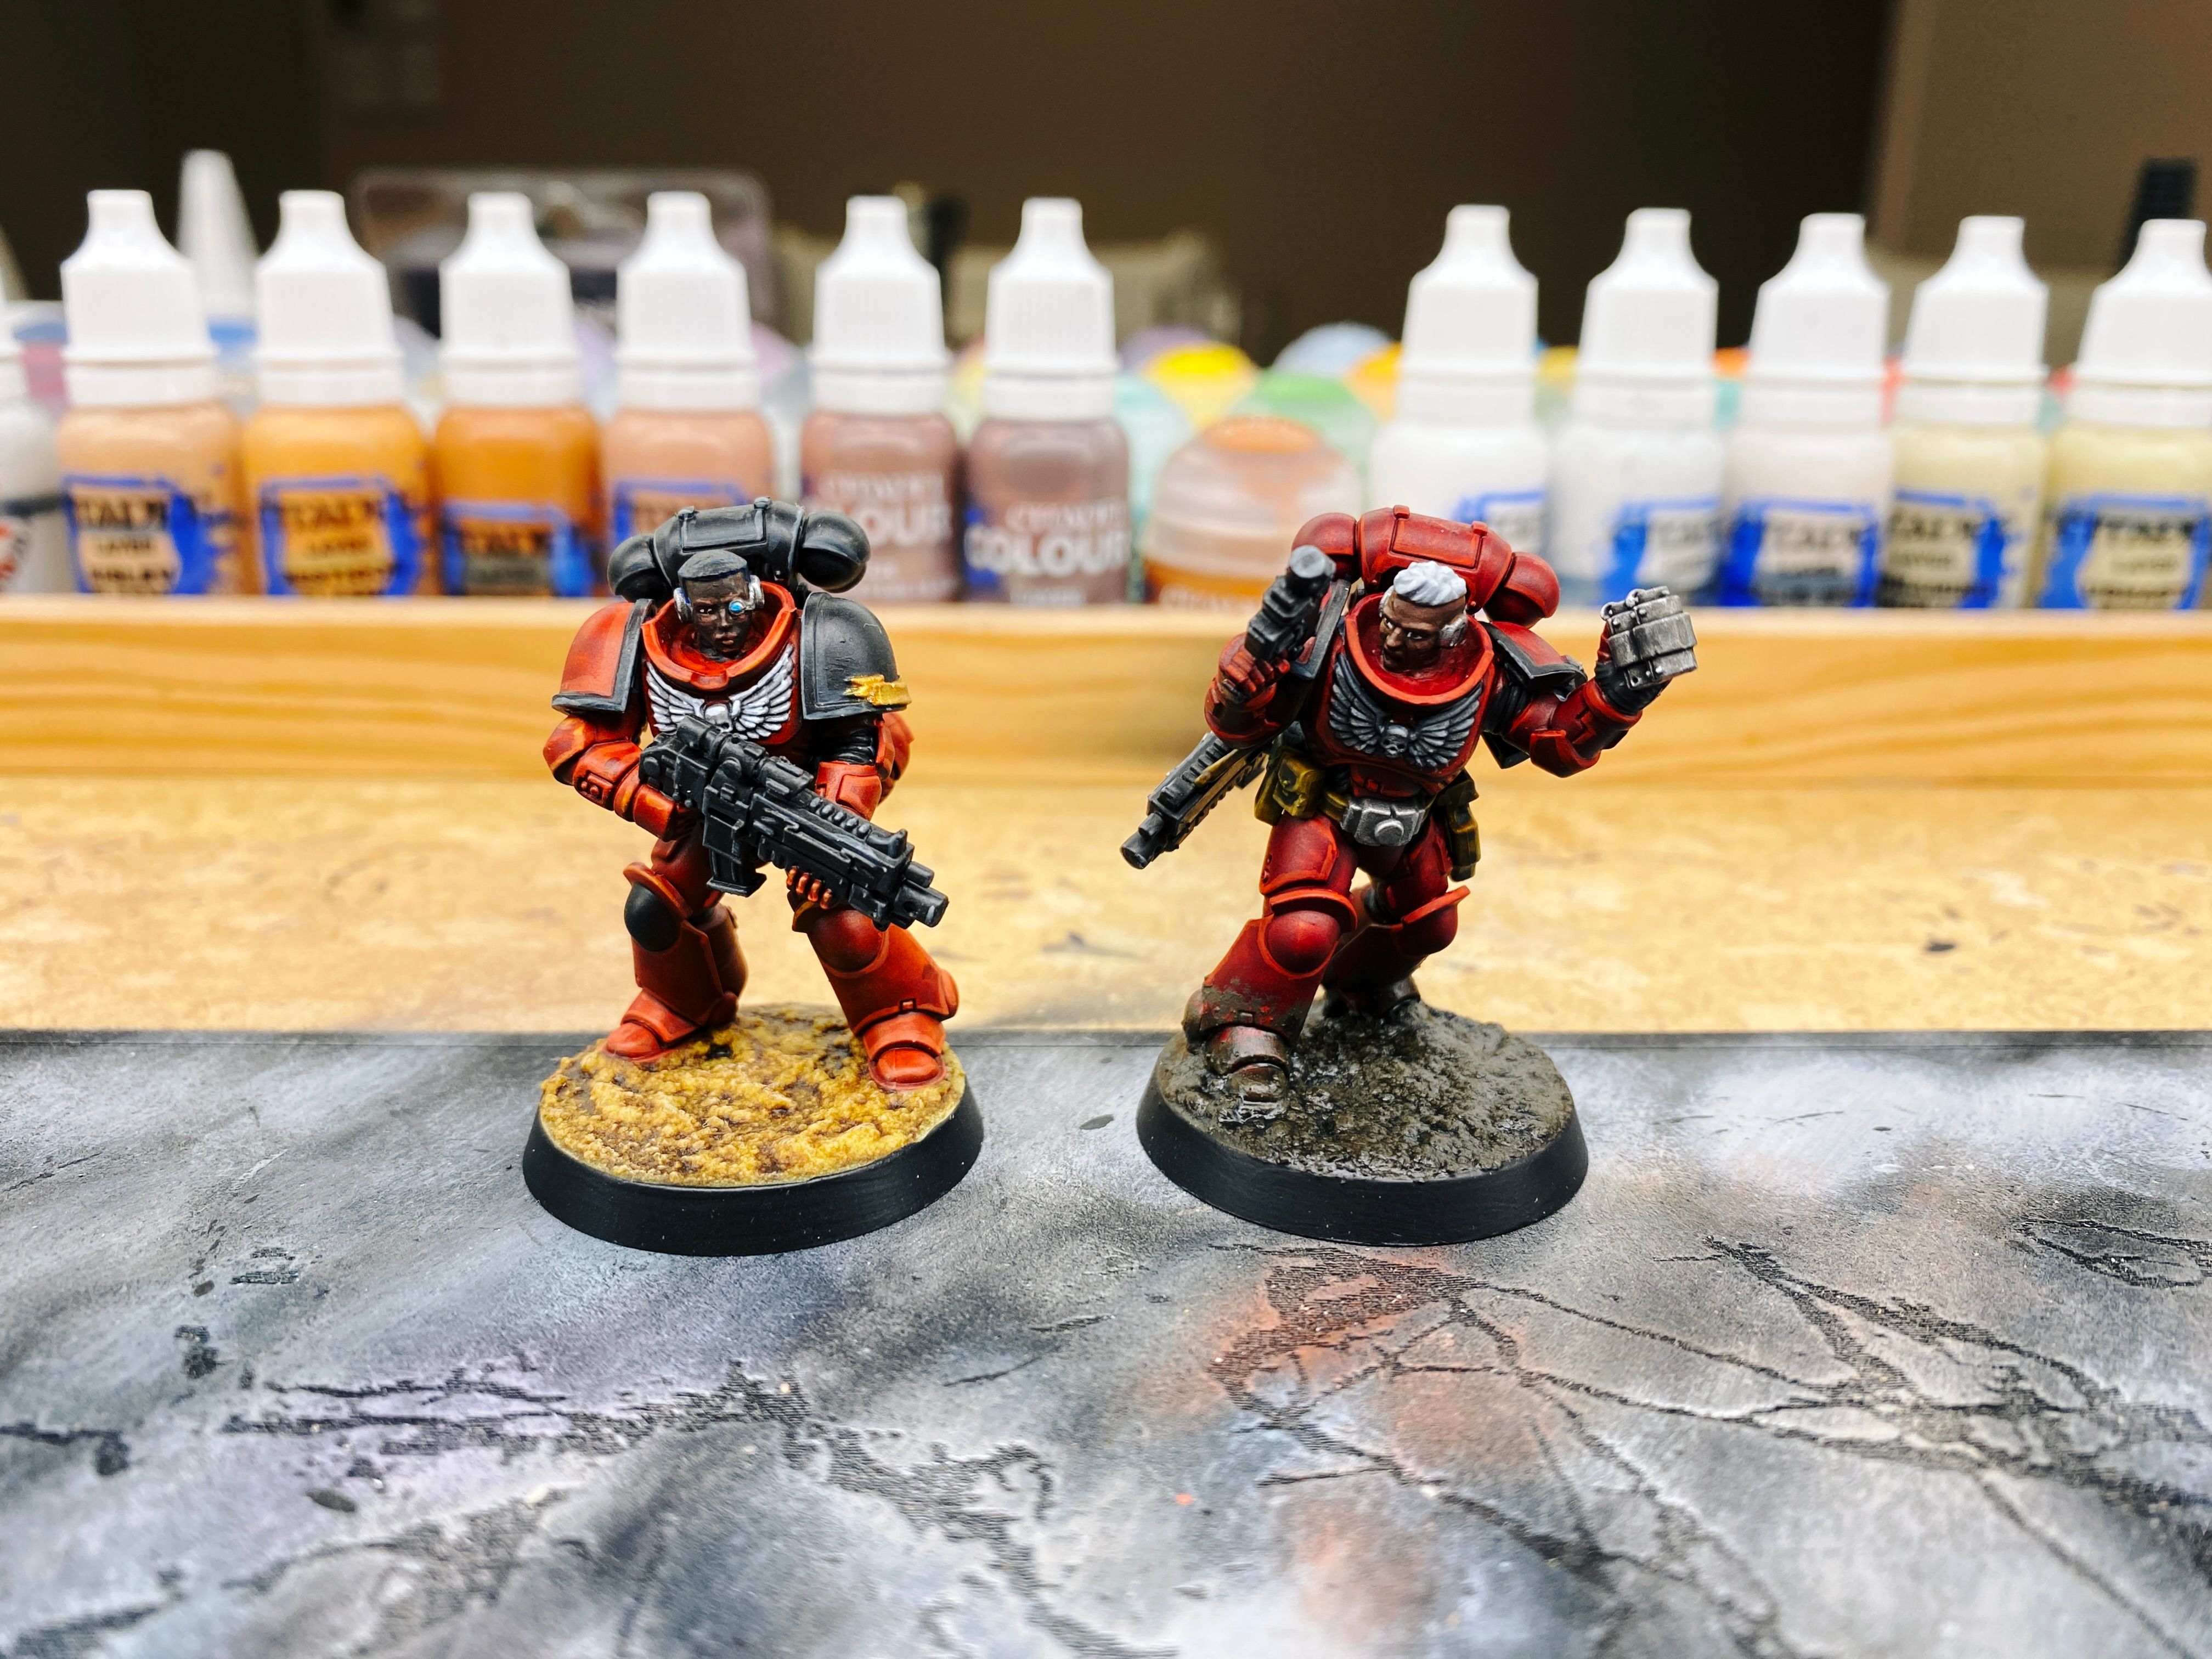 A photo of two fully-painted Space Marine miniatures with bare heads standing next to each other. The left is holding her boltgun in front of like she's standing on guard, and the base is a sort of desert rocky-looking texture/colour. The one on the right is a much deeper richer red, far closer to the colour of blood, and she has a pistol held in one hand and is in the middle of throwing a grenade with the other. Her base looks like really thick mud and it's splattered half-way up to the knees so it looks like she's been really tromping around a battlefield.